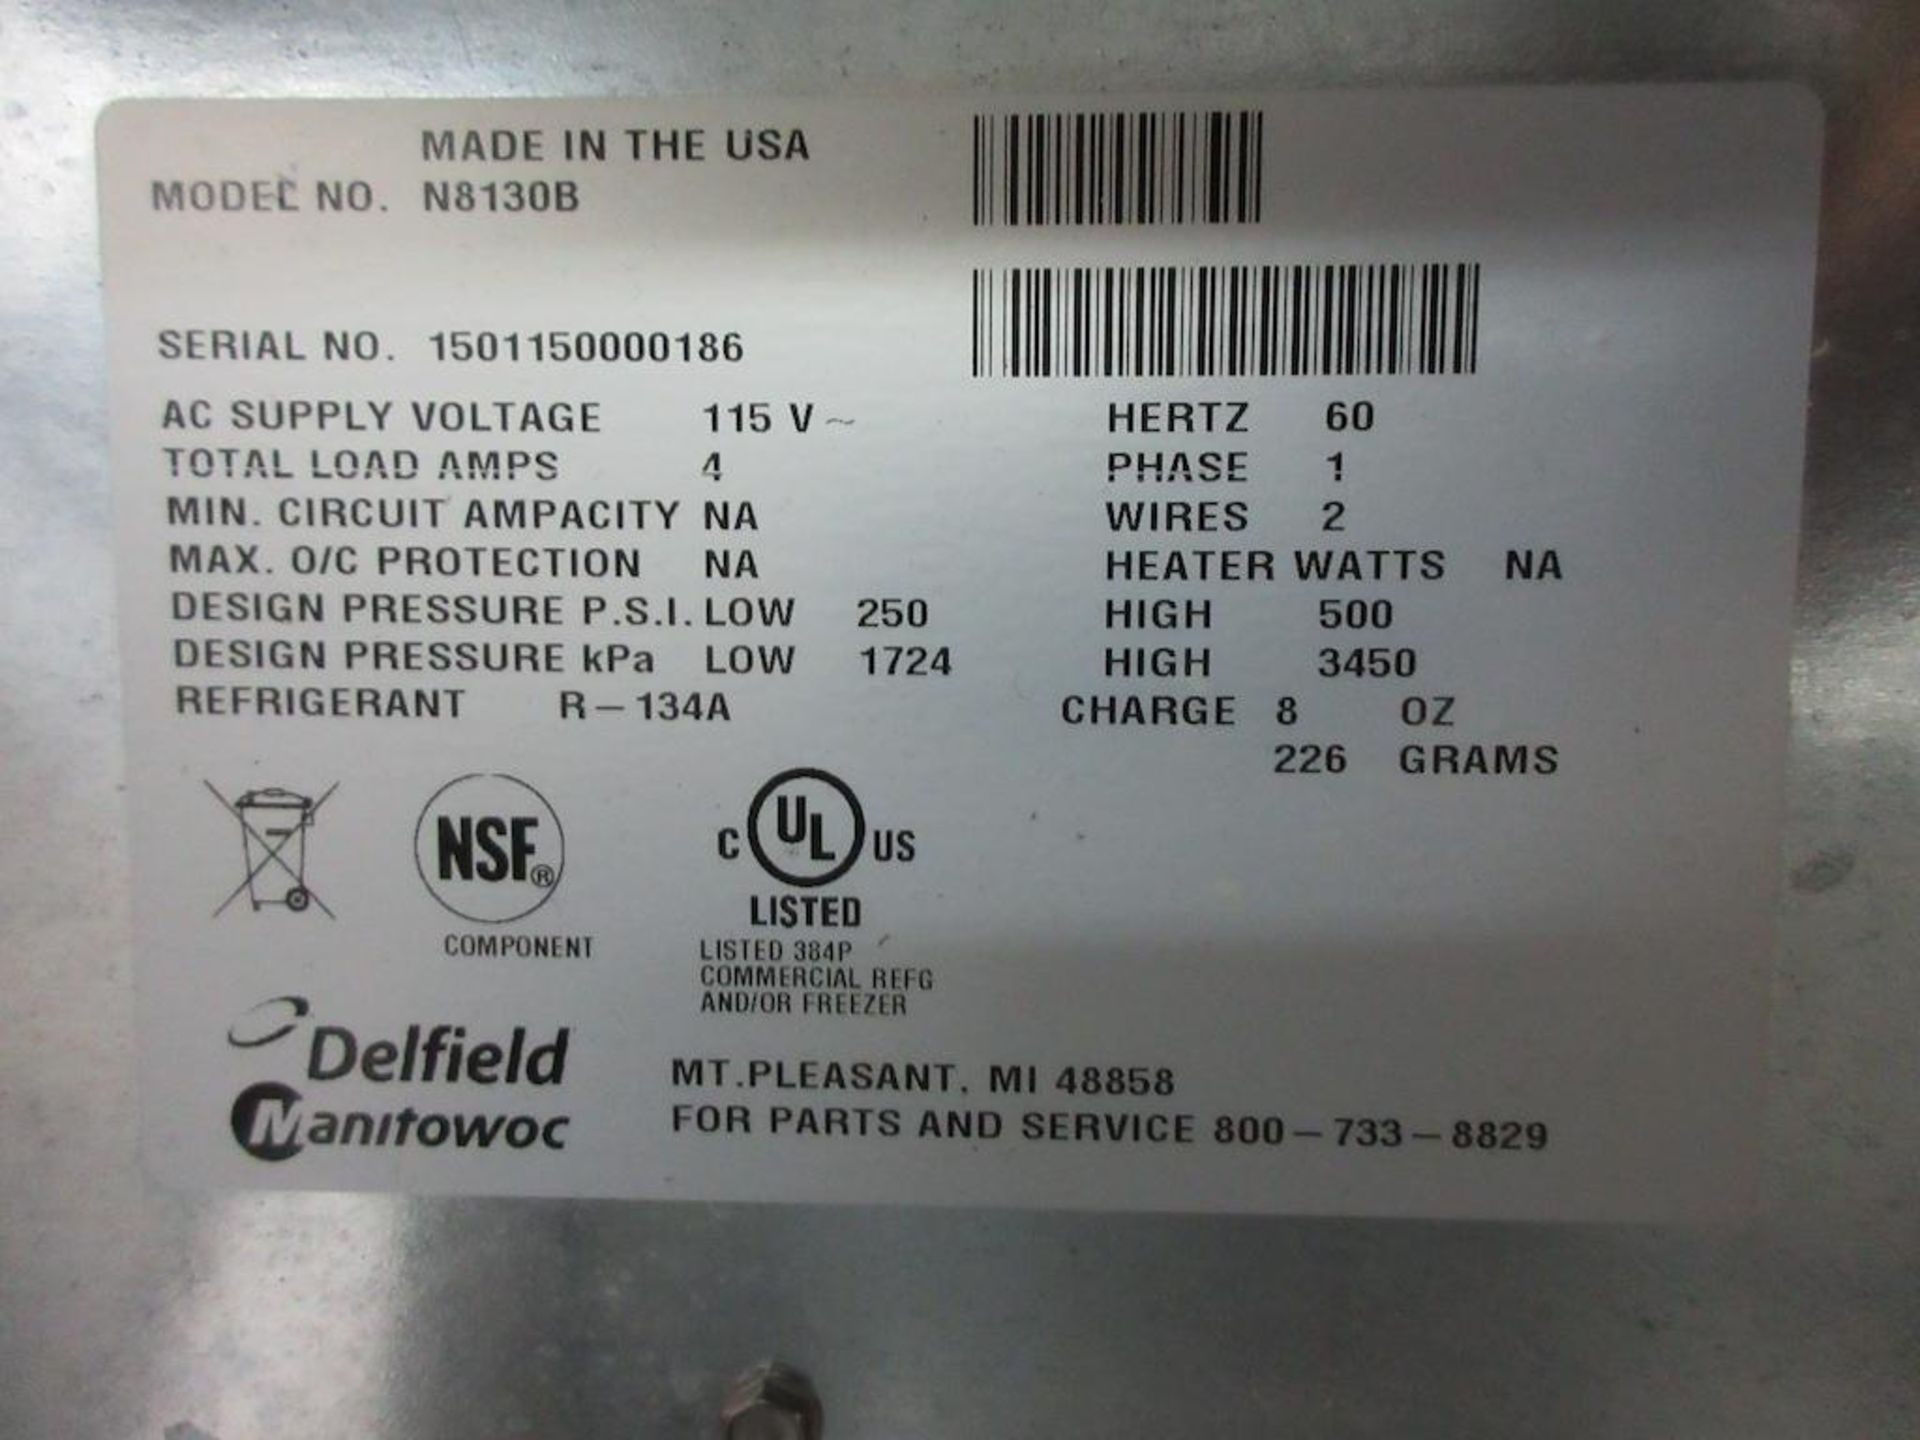 Delfield Manitowoc counter drop in refrigerated cold well, model N8130B, 21.5" x 26" x 9.5", sn 1501 - Image 5 of 5